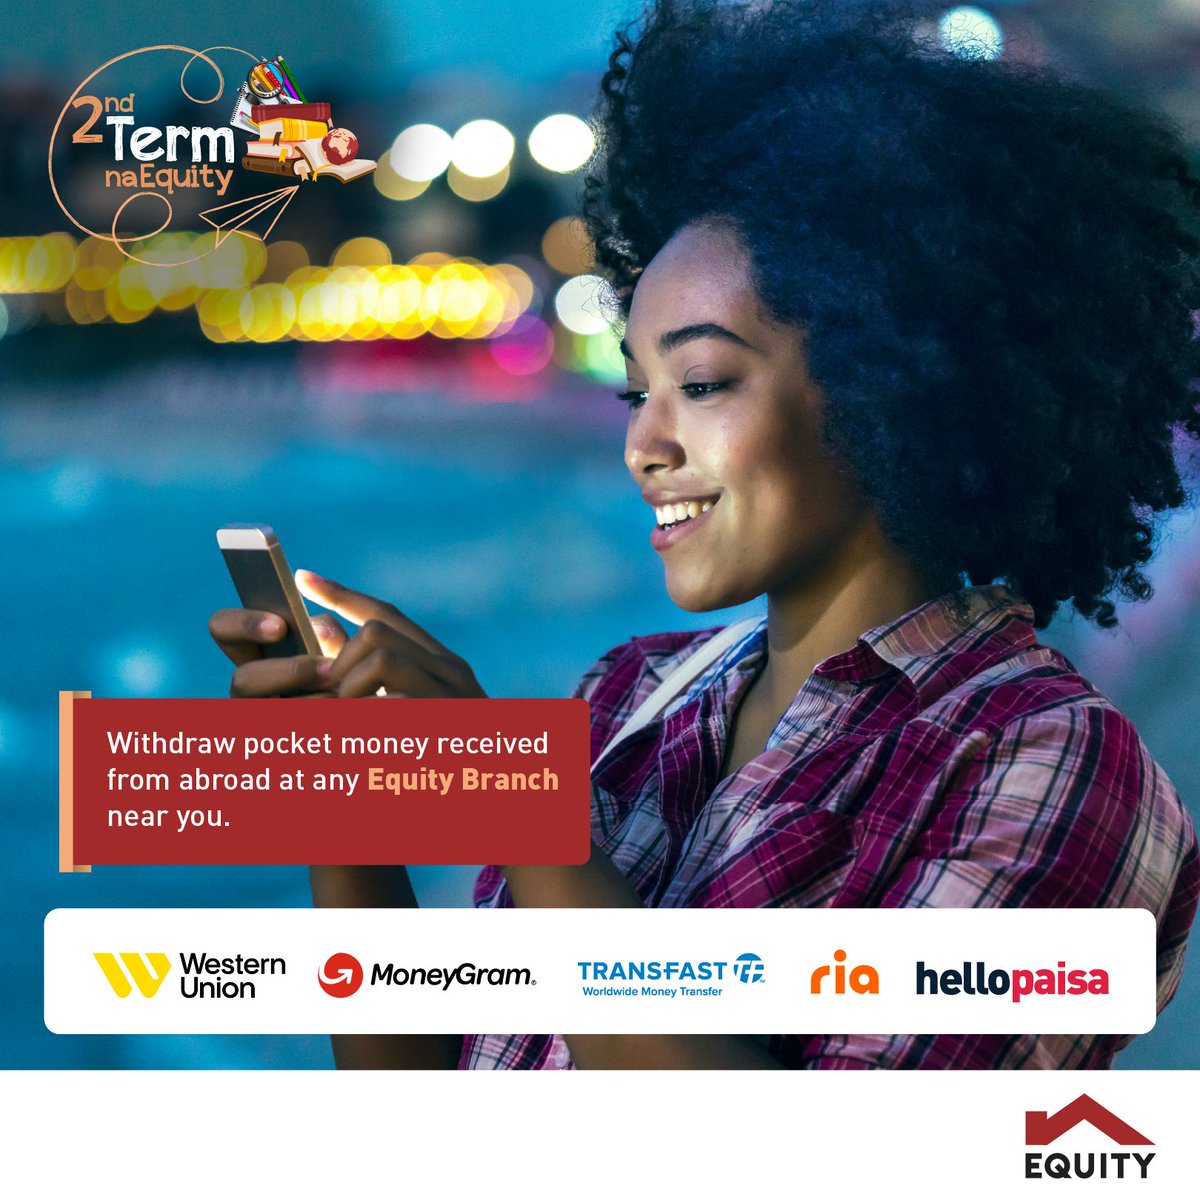 Uki-recieve upkeep ama school fees ya mtoi
from your loved one abroad through any of
these international money transfer partners,
unaweza withdraw vi-rahisi at any Equity
branches countrywide.

#BackToSchool
#SecondTermNaEquity
@WesternUnion @MoneyGram @hellopaisaSA @KeEquityBank